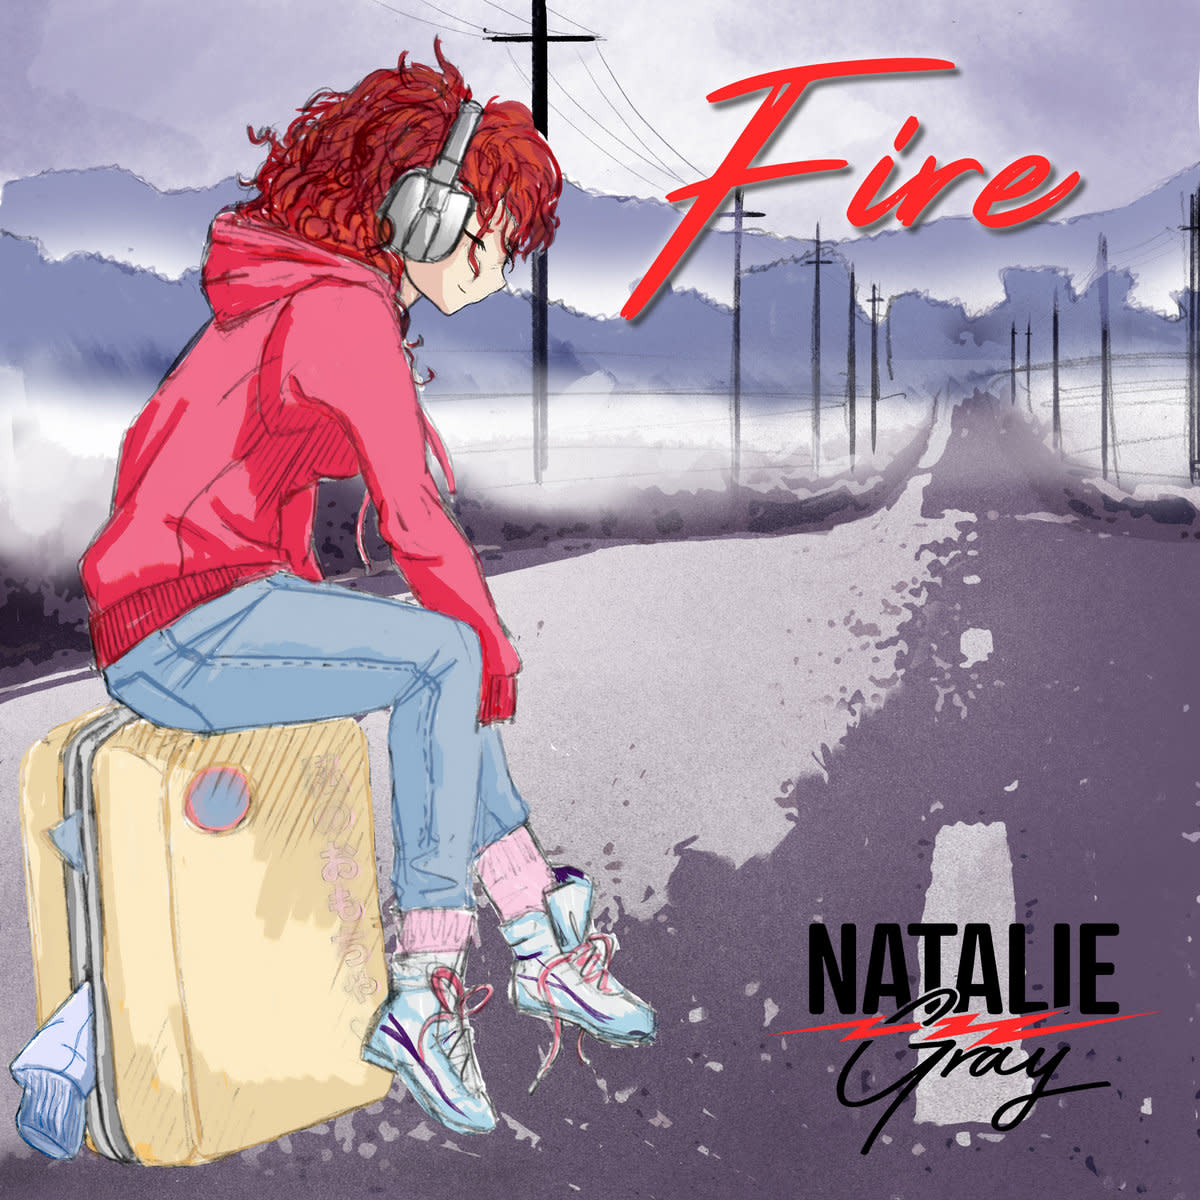 synthpop-single-review-fire-by-natalie-gray